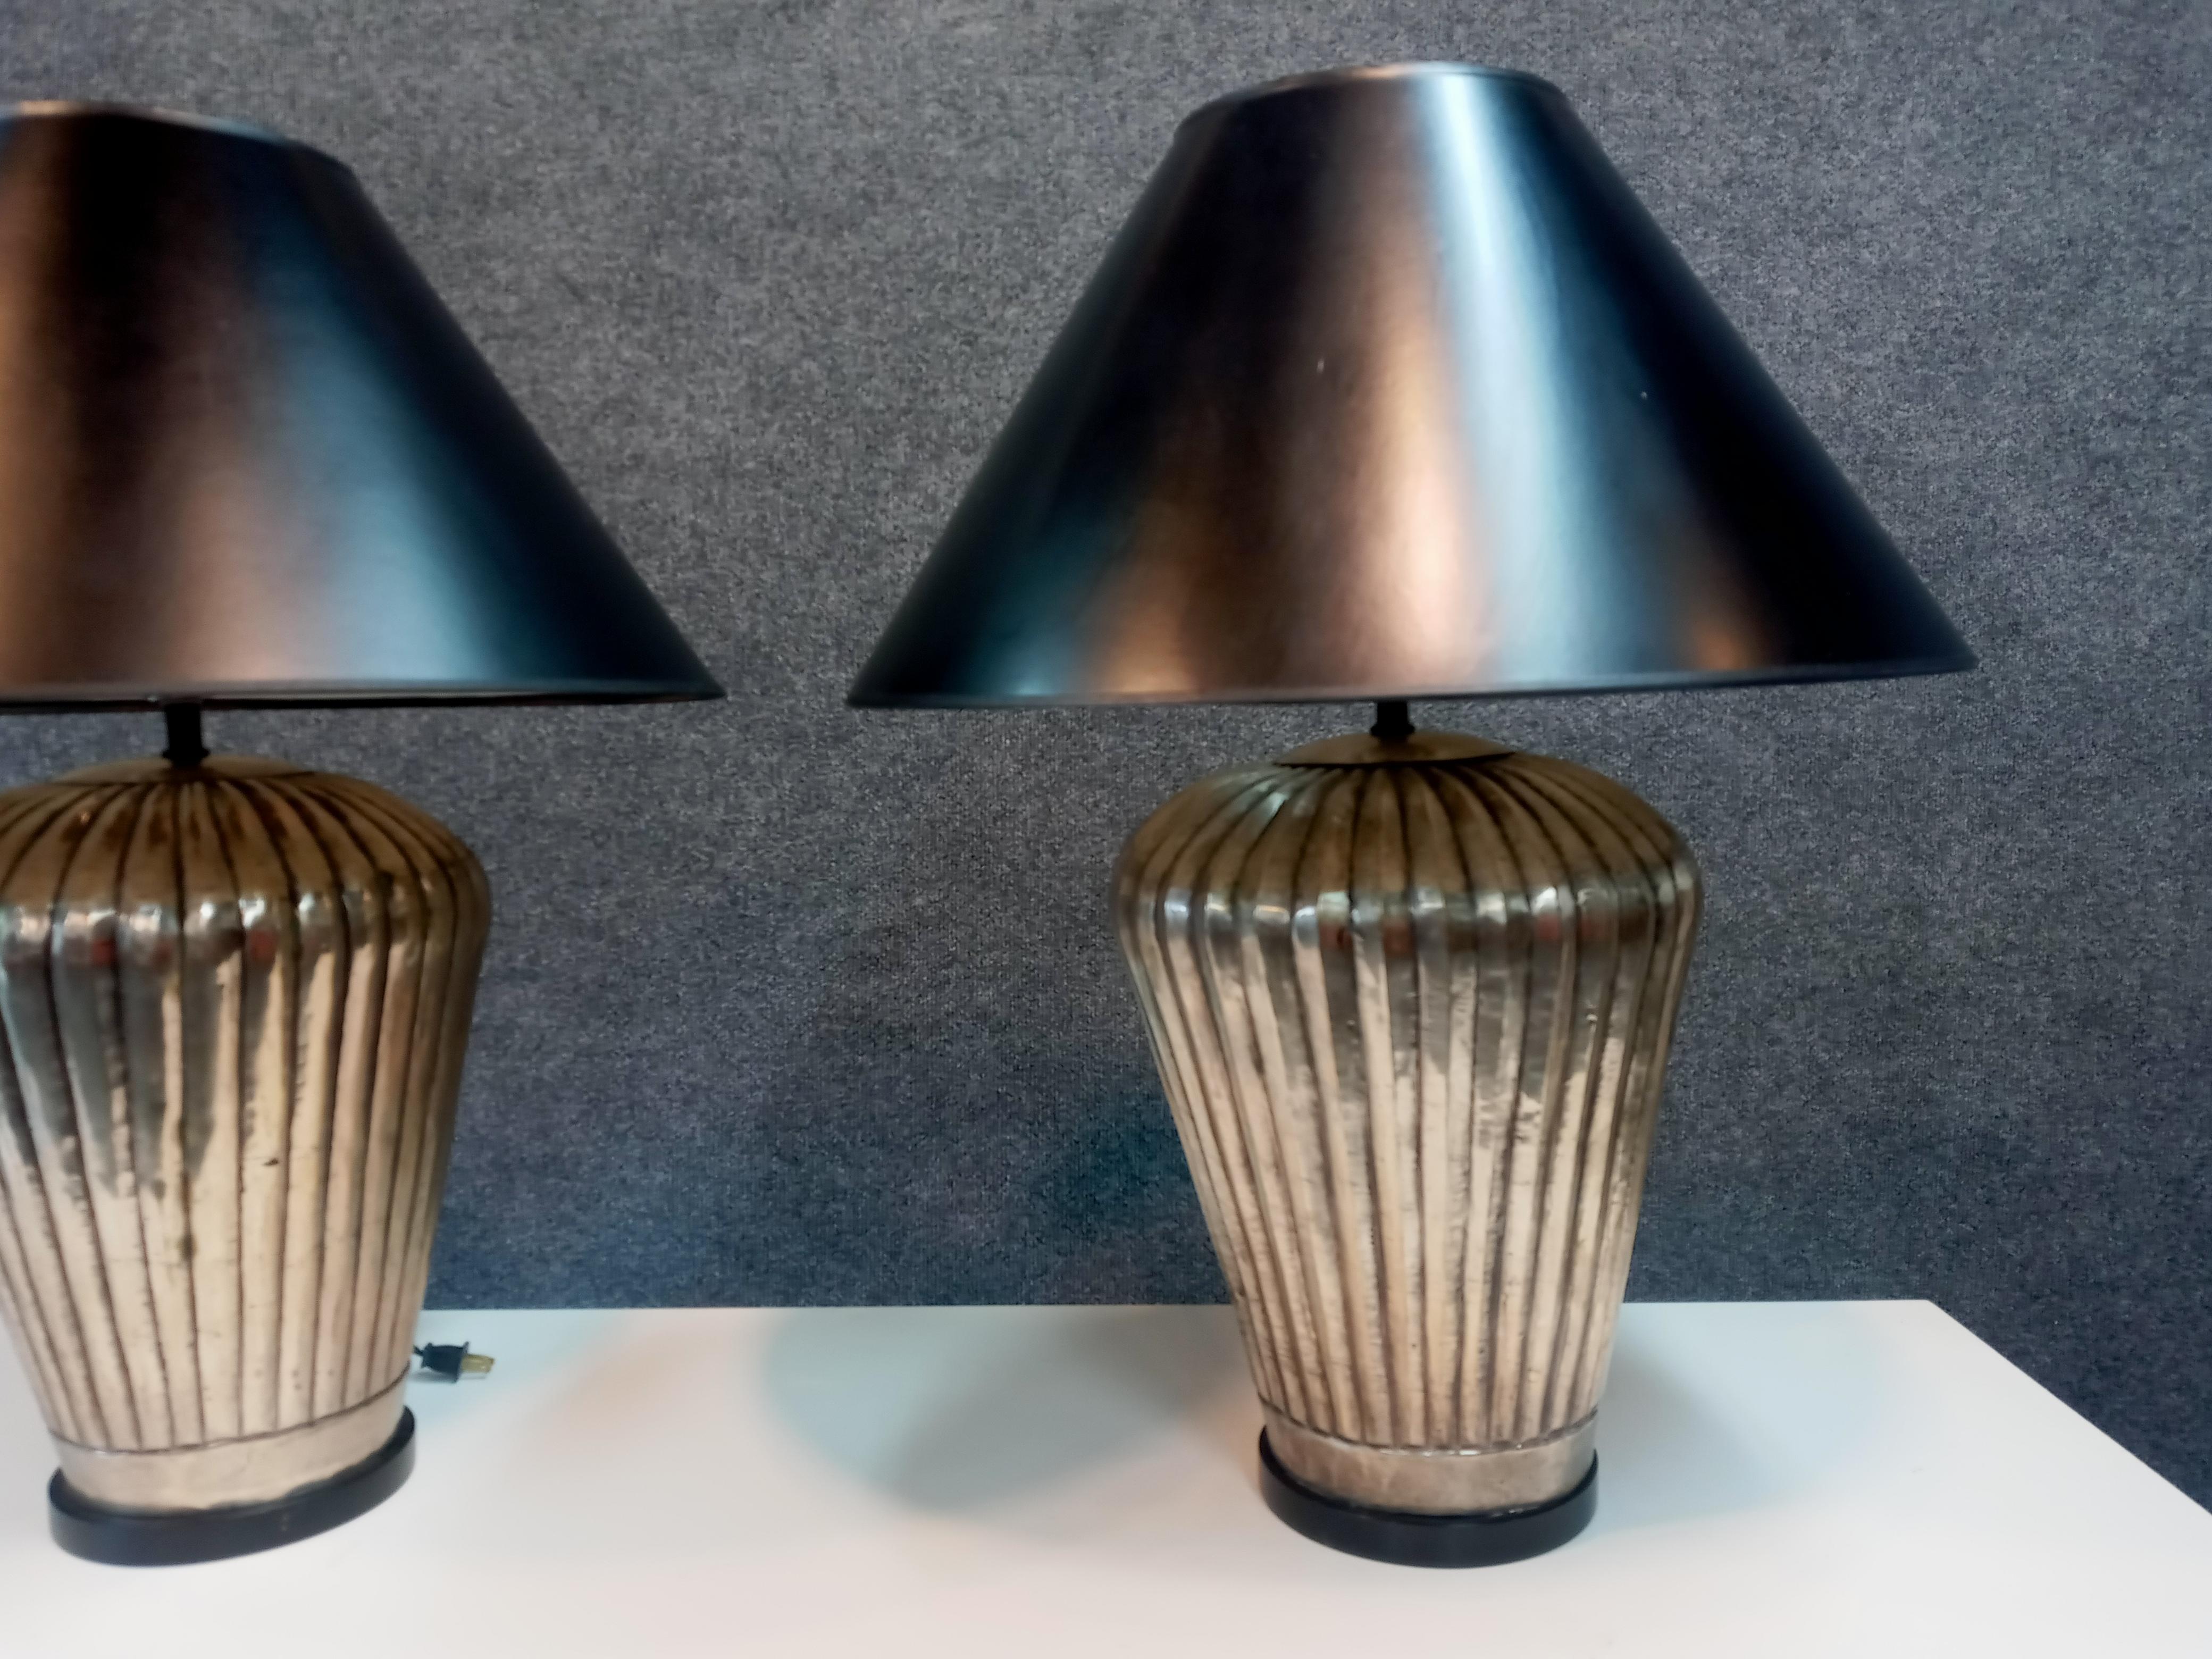 Pair of vintage hammered metal table lamps with original hardware and shades. 

With shades: 26 x 20 diameter

Without shades: 14.5 x 10 diameter

Lamps are single socket and in good working order.